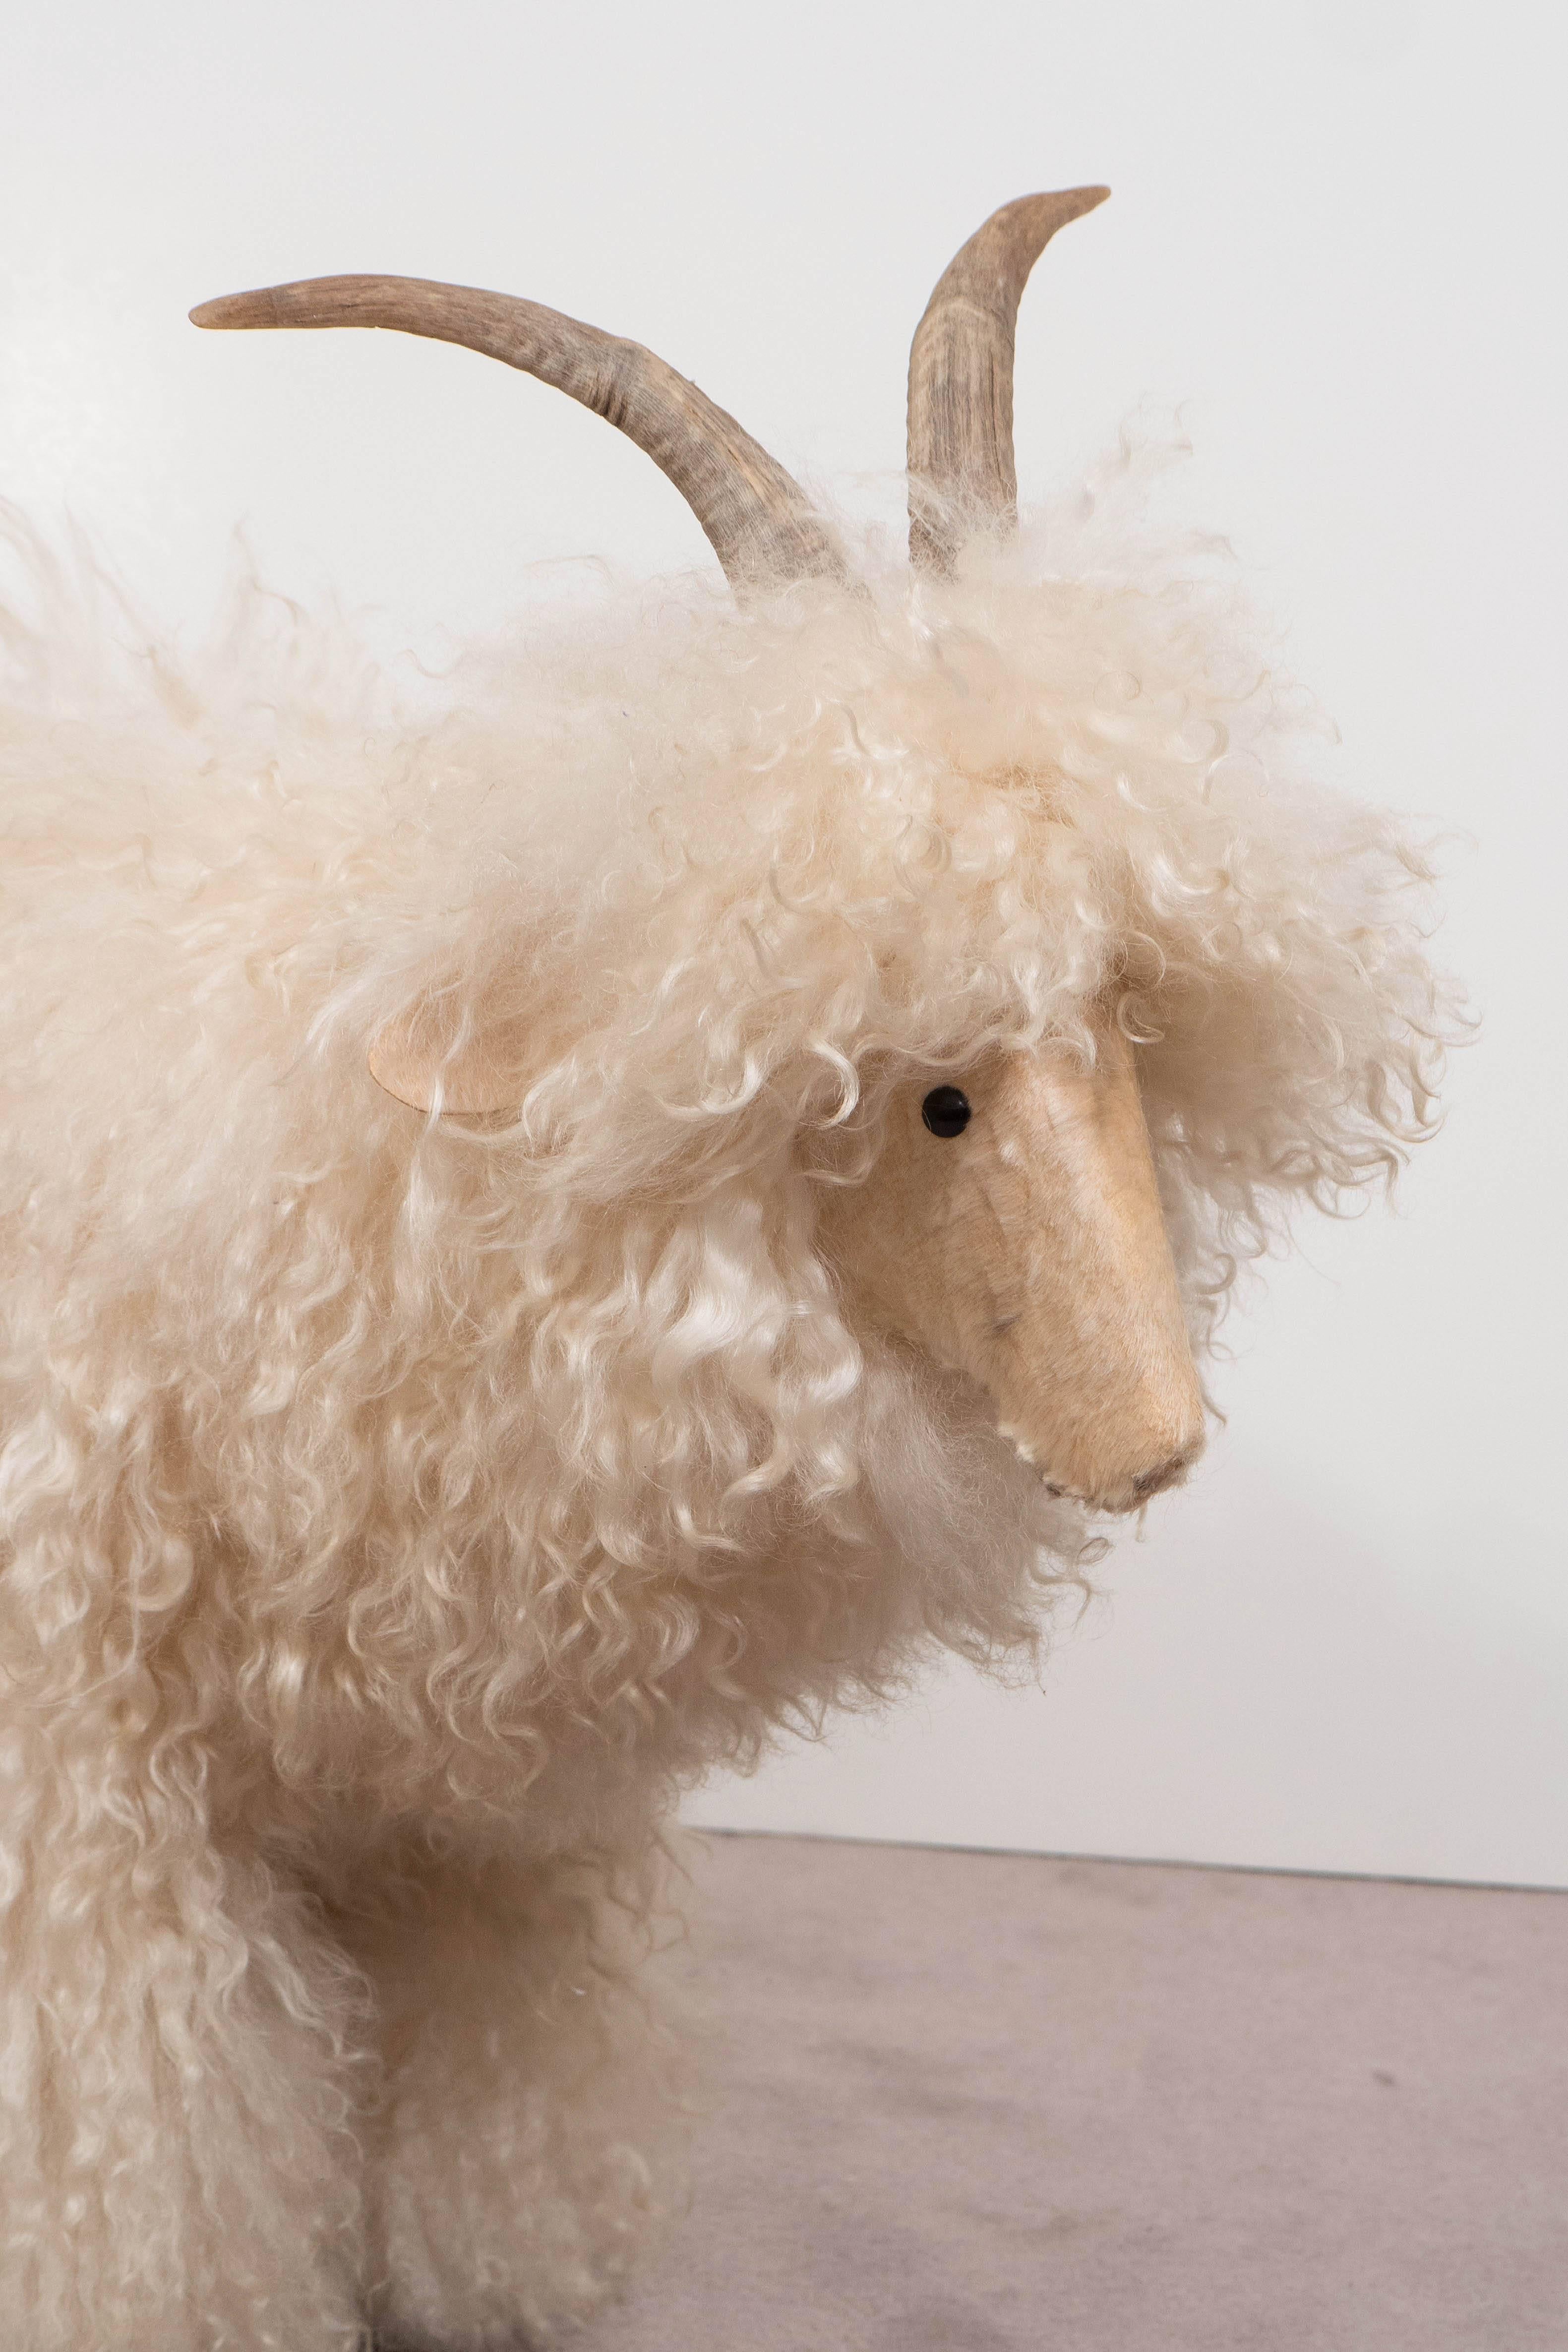 A sculpture of a white sheep, featuring genuine sheepskin and horns, with wooden legs and black buttons for eyes. It is reminiscent of the style of Francois Xavier Lalanne, French artist known for his ‘Herds of Sheep’ created in the 1960s. The